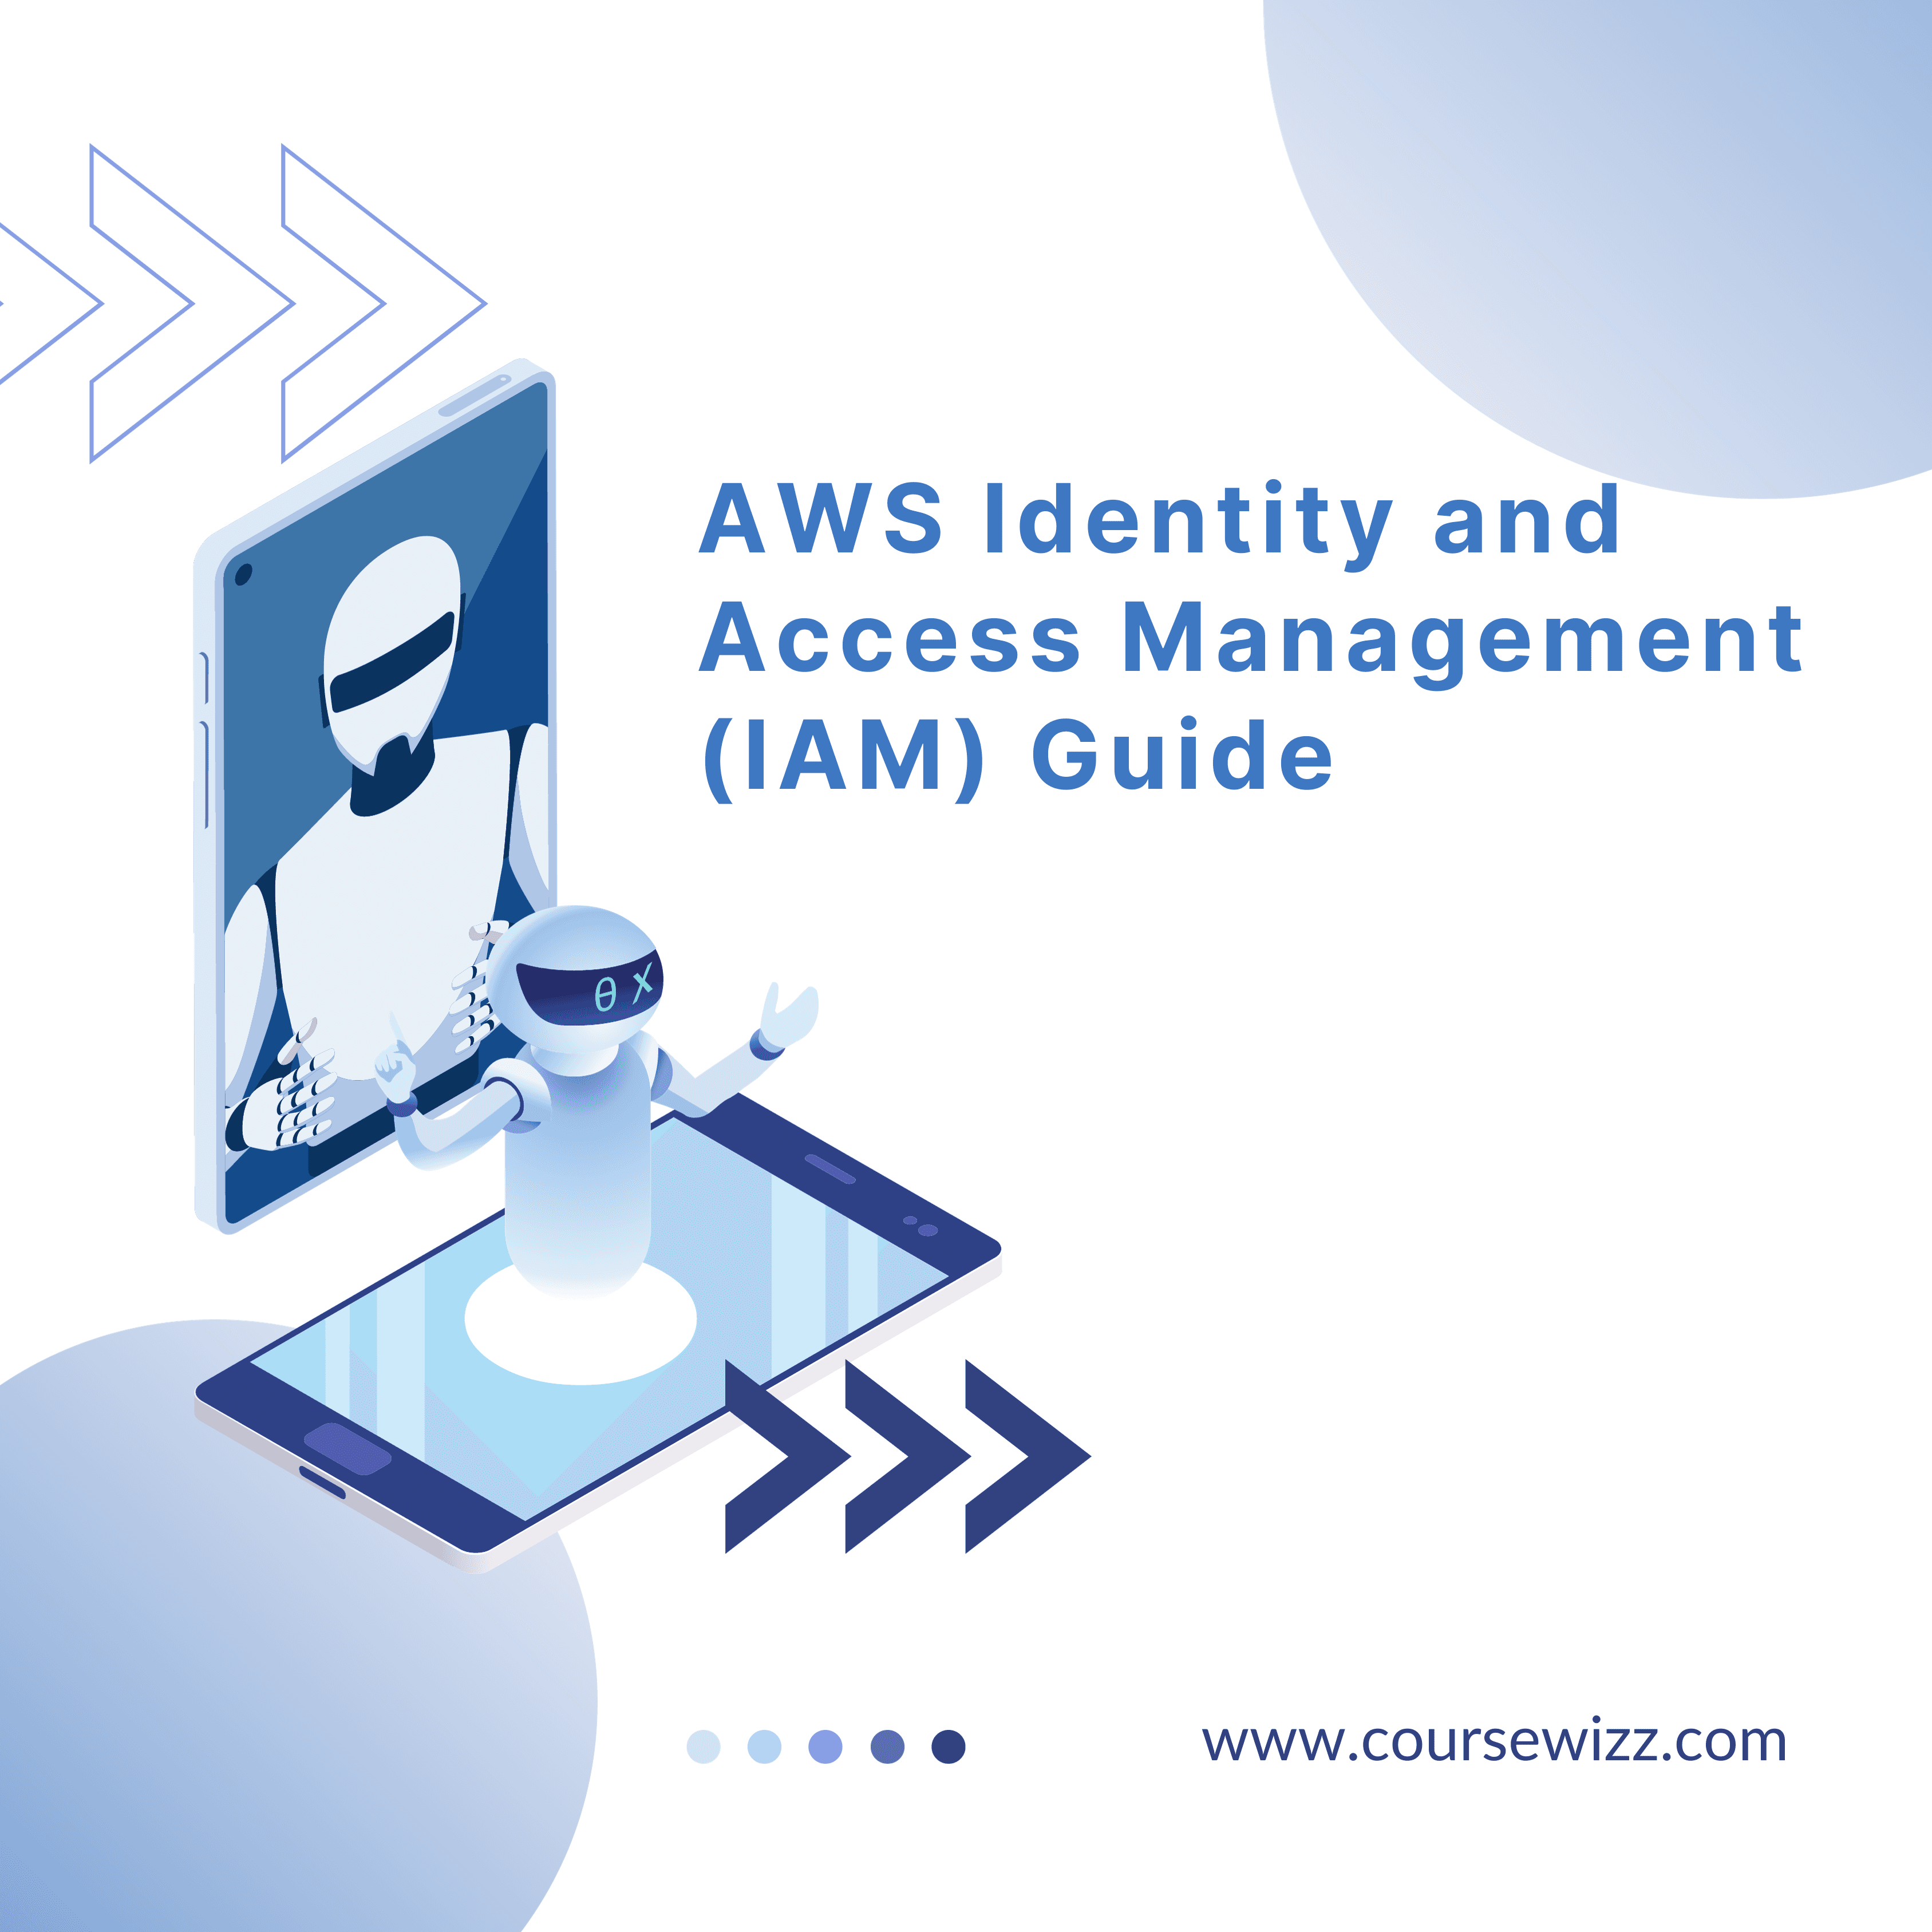 AWS Identity and Access Management (IAM) Guide